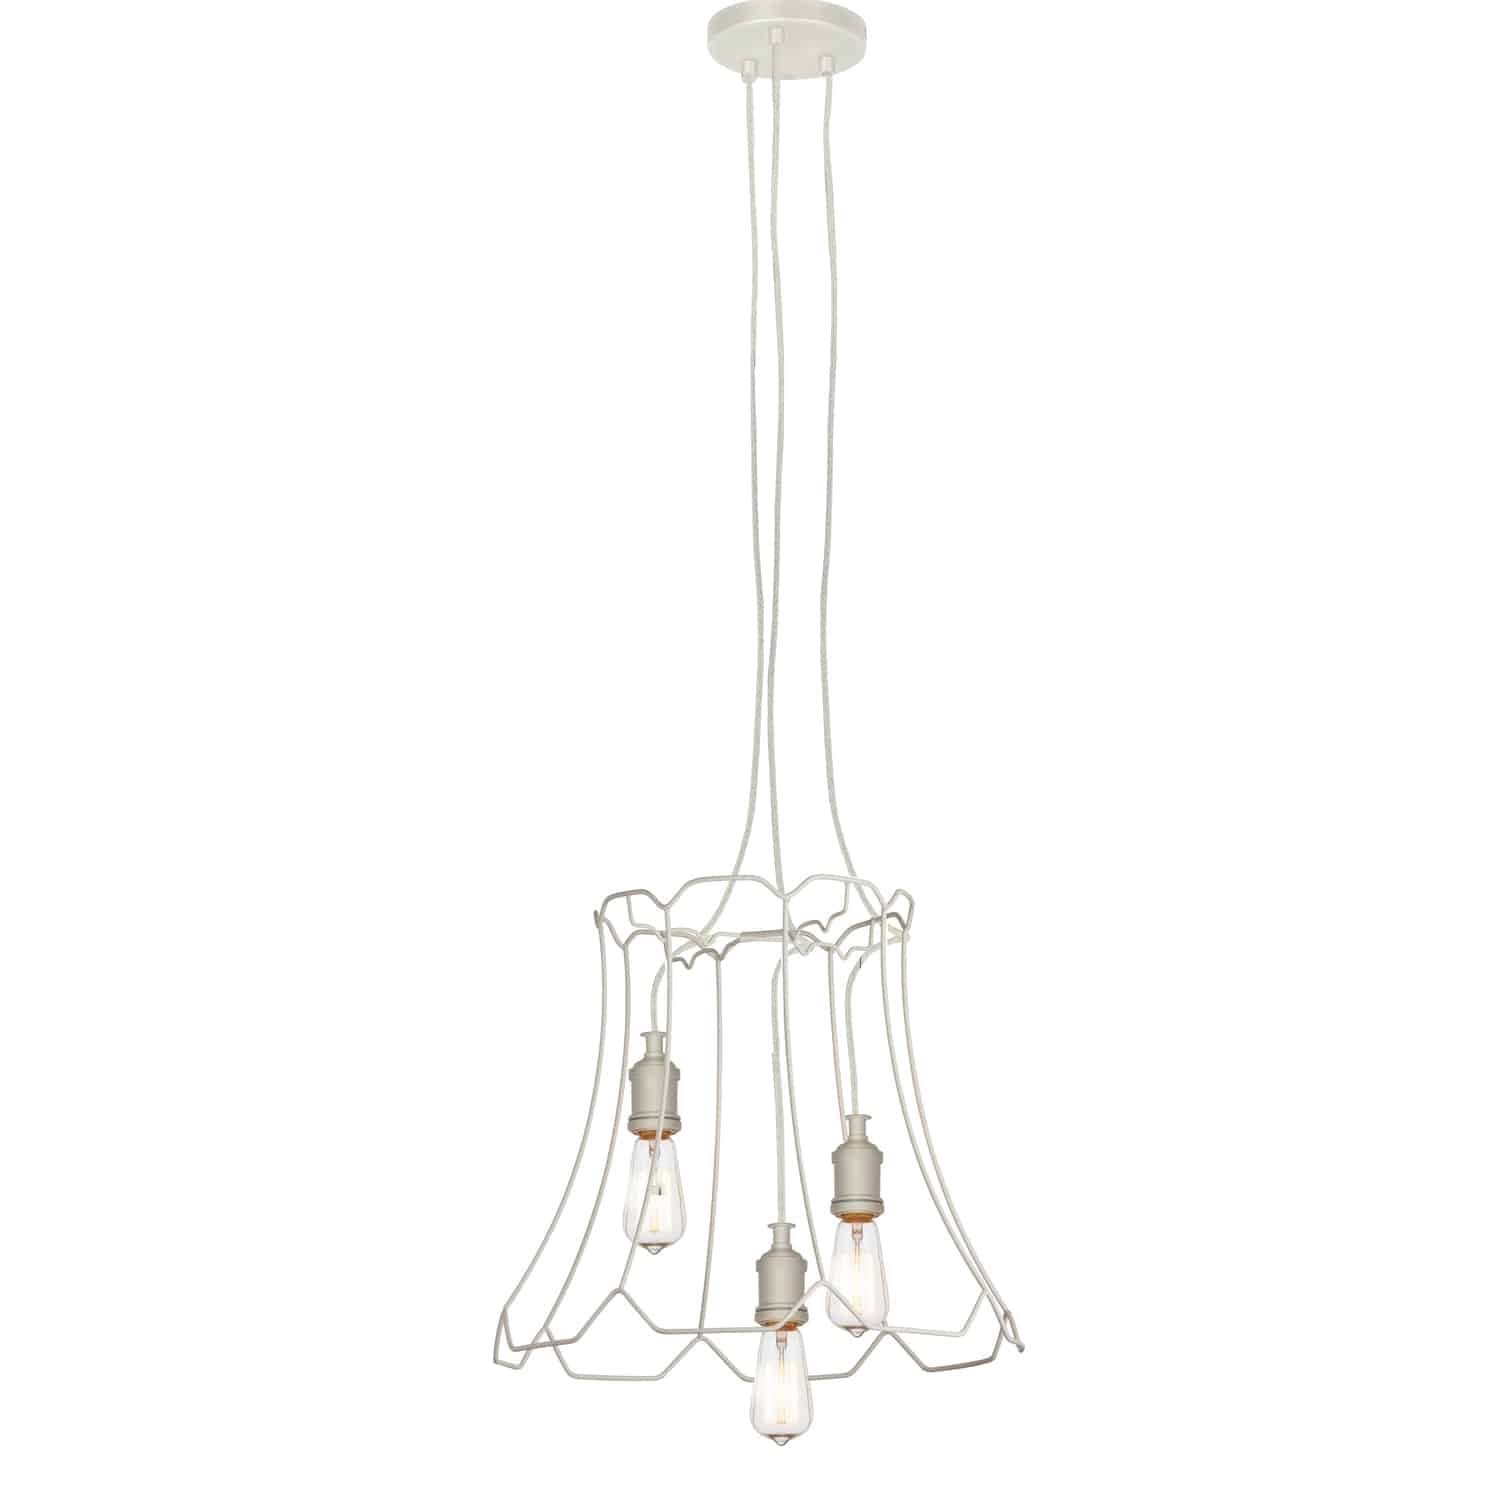 Its outlines recall traditional designs, with a sleek construction that gives it a thoroughly contemporary appeal. The Belenko family of lighting adds graceful curves and a touch of decorative luxury to your home. The metal frame drops to an open base that is curved and tapered, with a notched element at both ends to add to its lyrical appeal. Available in your choice of neutrals, the look blends with modern and ultra-modern décors. Belenko lighting creates an artistic touch to your kitchen or hallway areas with an airy look that won't overwhelming the space.